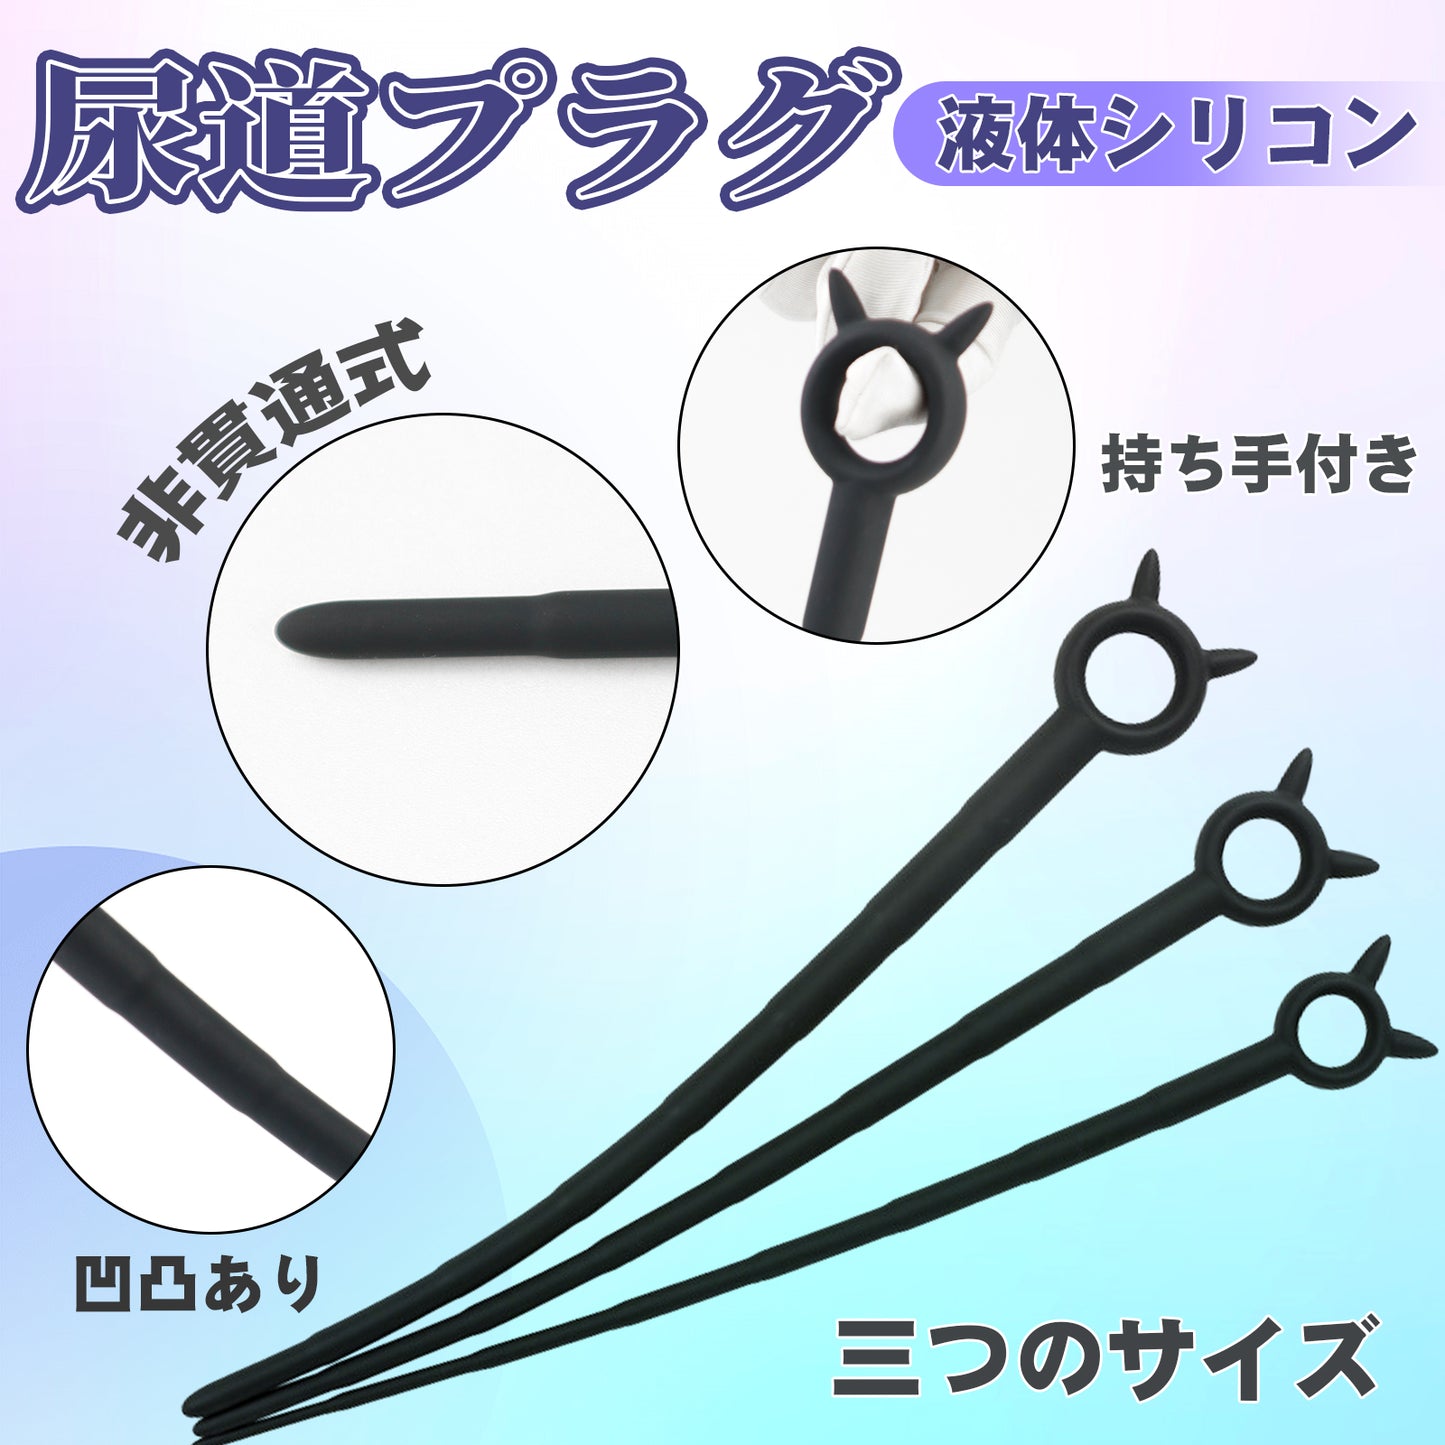 TARISS'S urethral bouggy urethral plug Non -permilled unevenness with silicon black